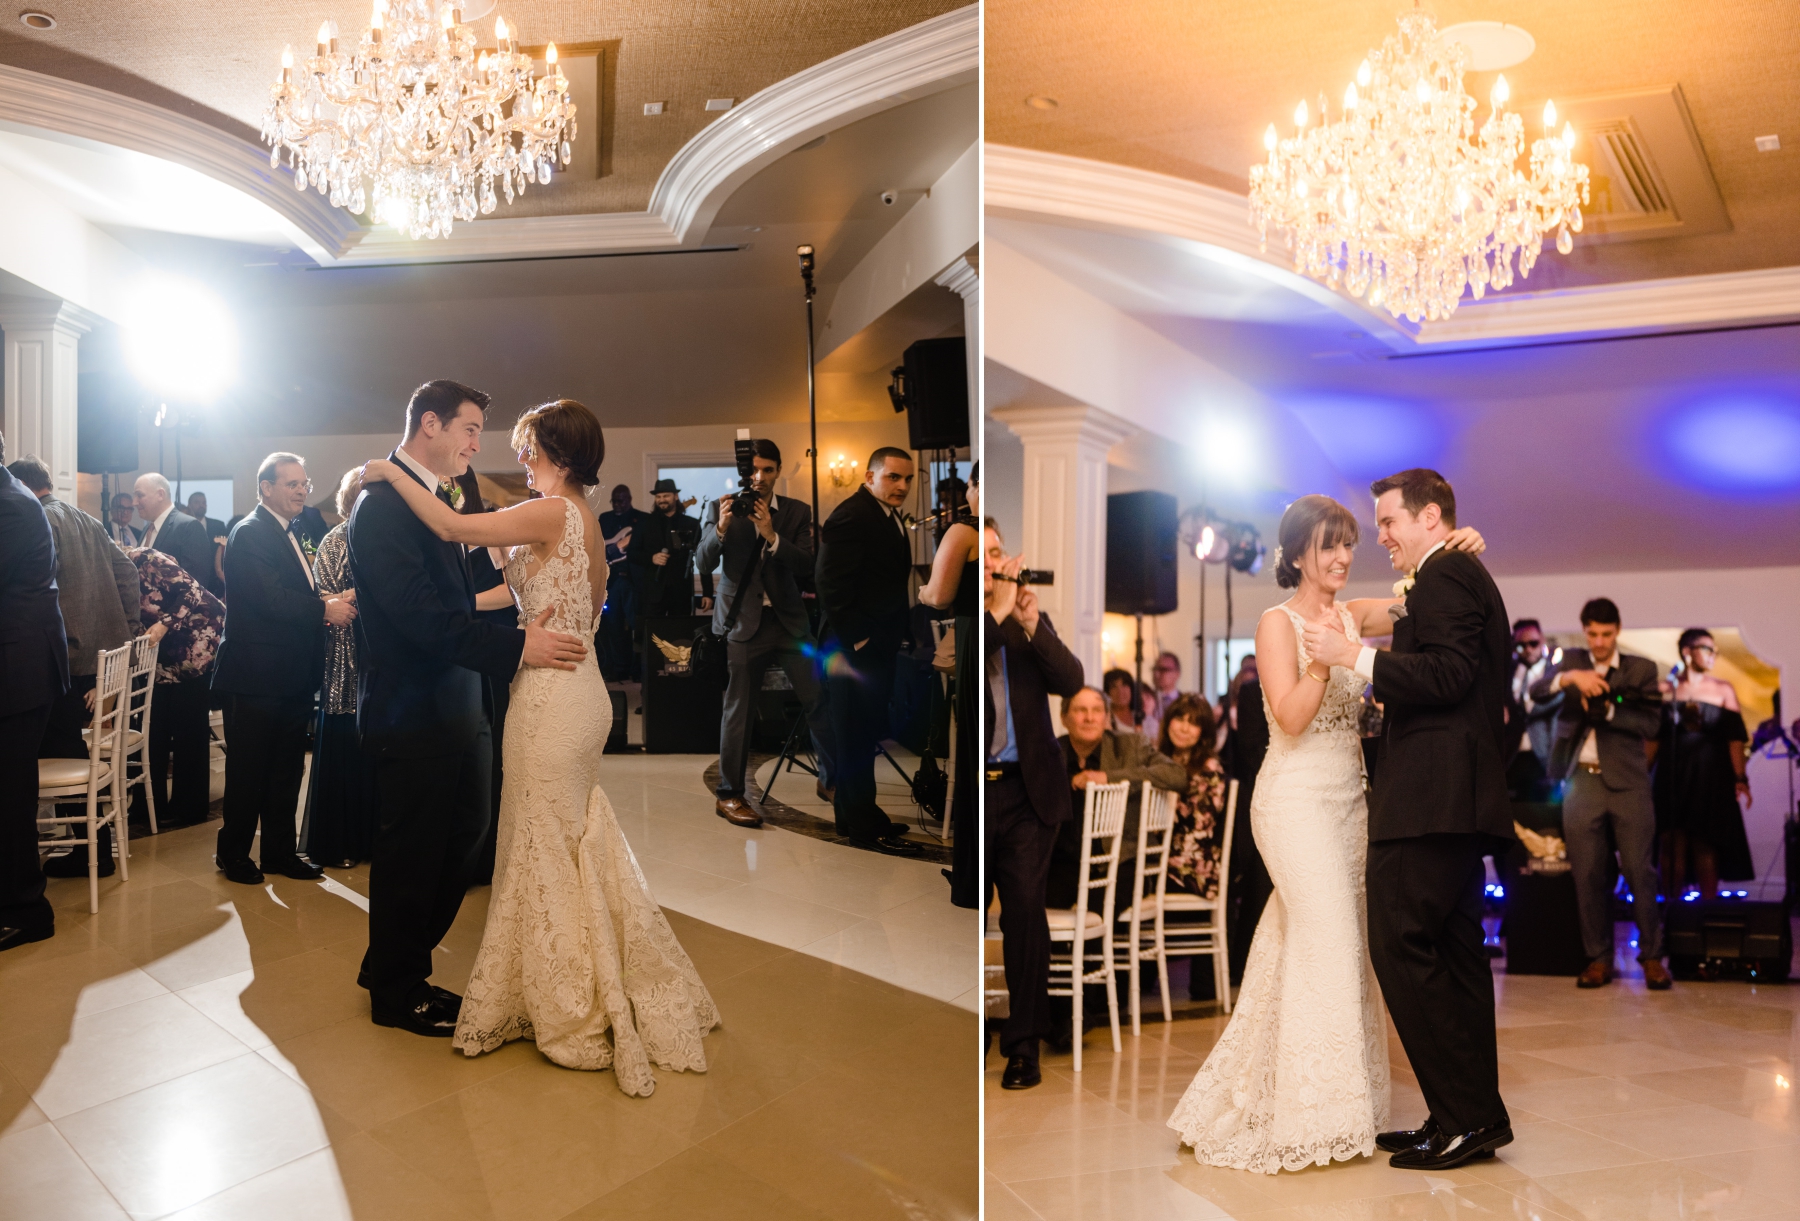  Scenes from Chris and Christina's New Jersey Wedding at Windows On the Water at Surfrider Beach Club. With an emphasis on modern, creative, natural light storytelling, each image is meant to tell a part of Chris and Christina's Day. Work was done wh